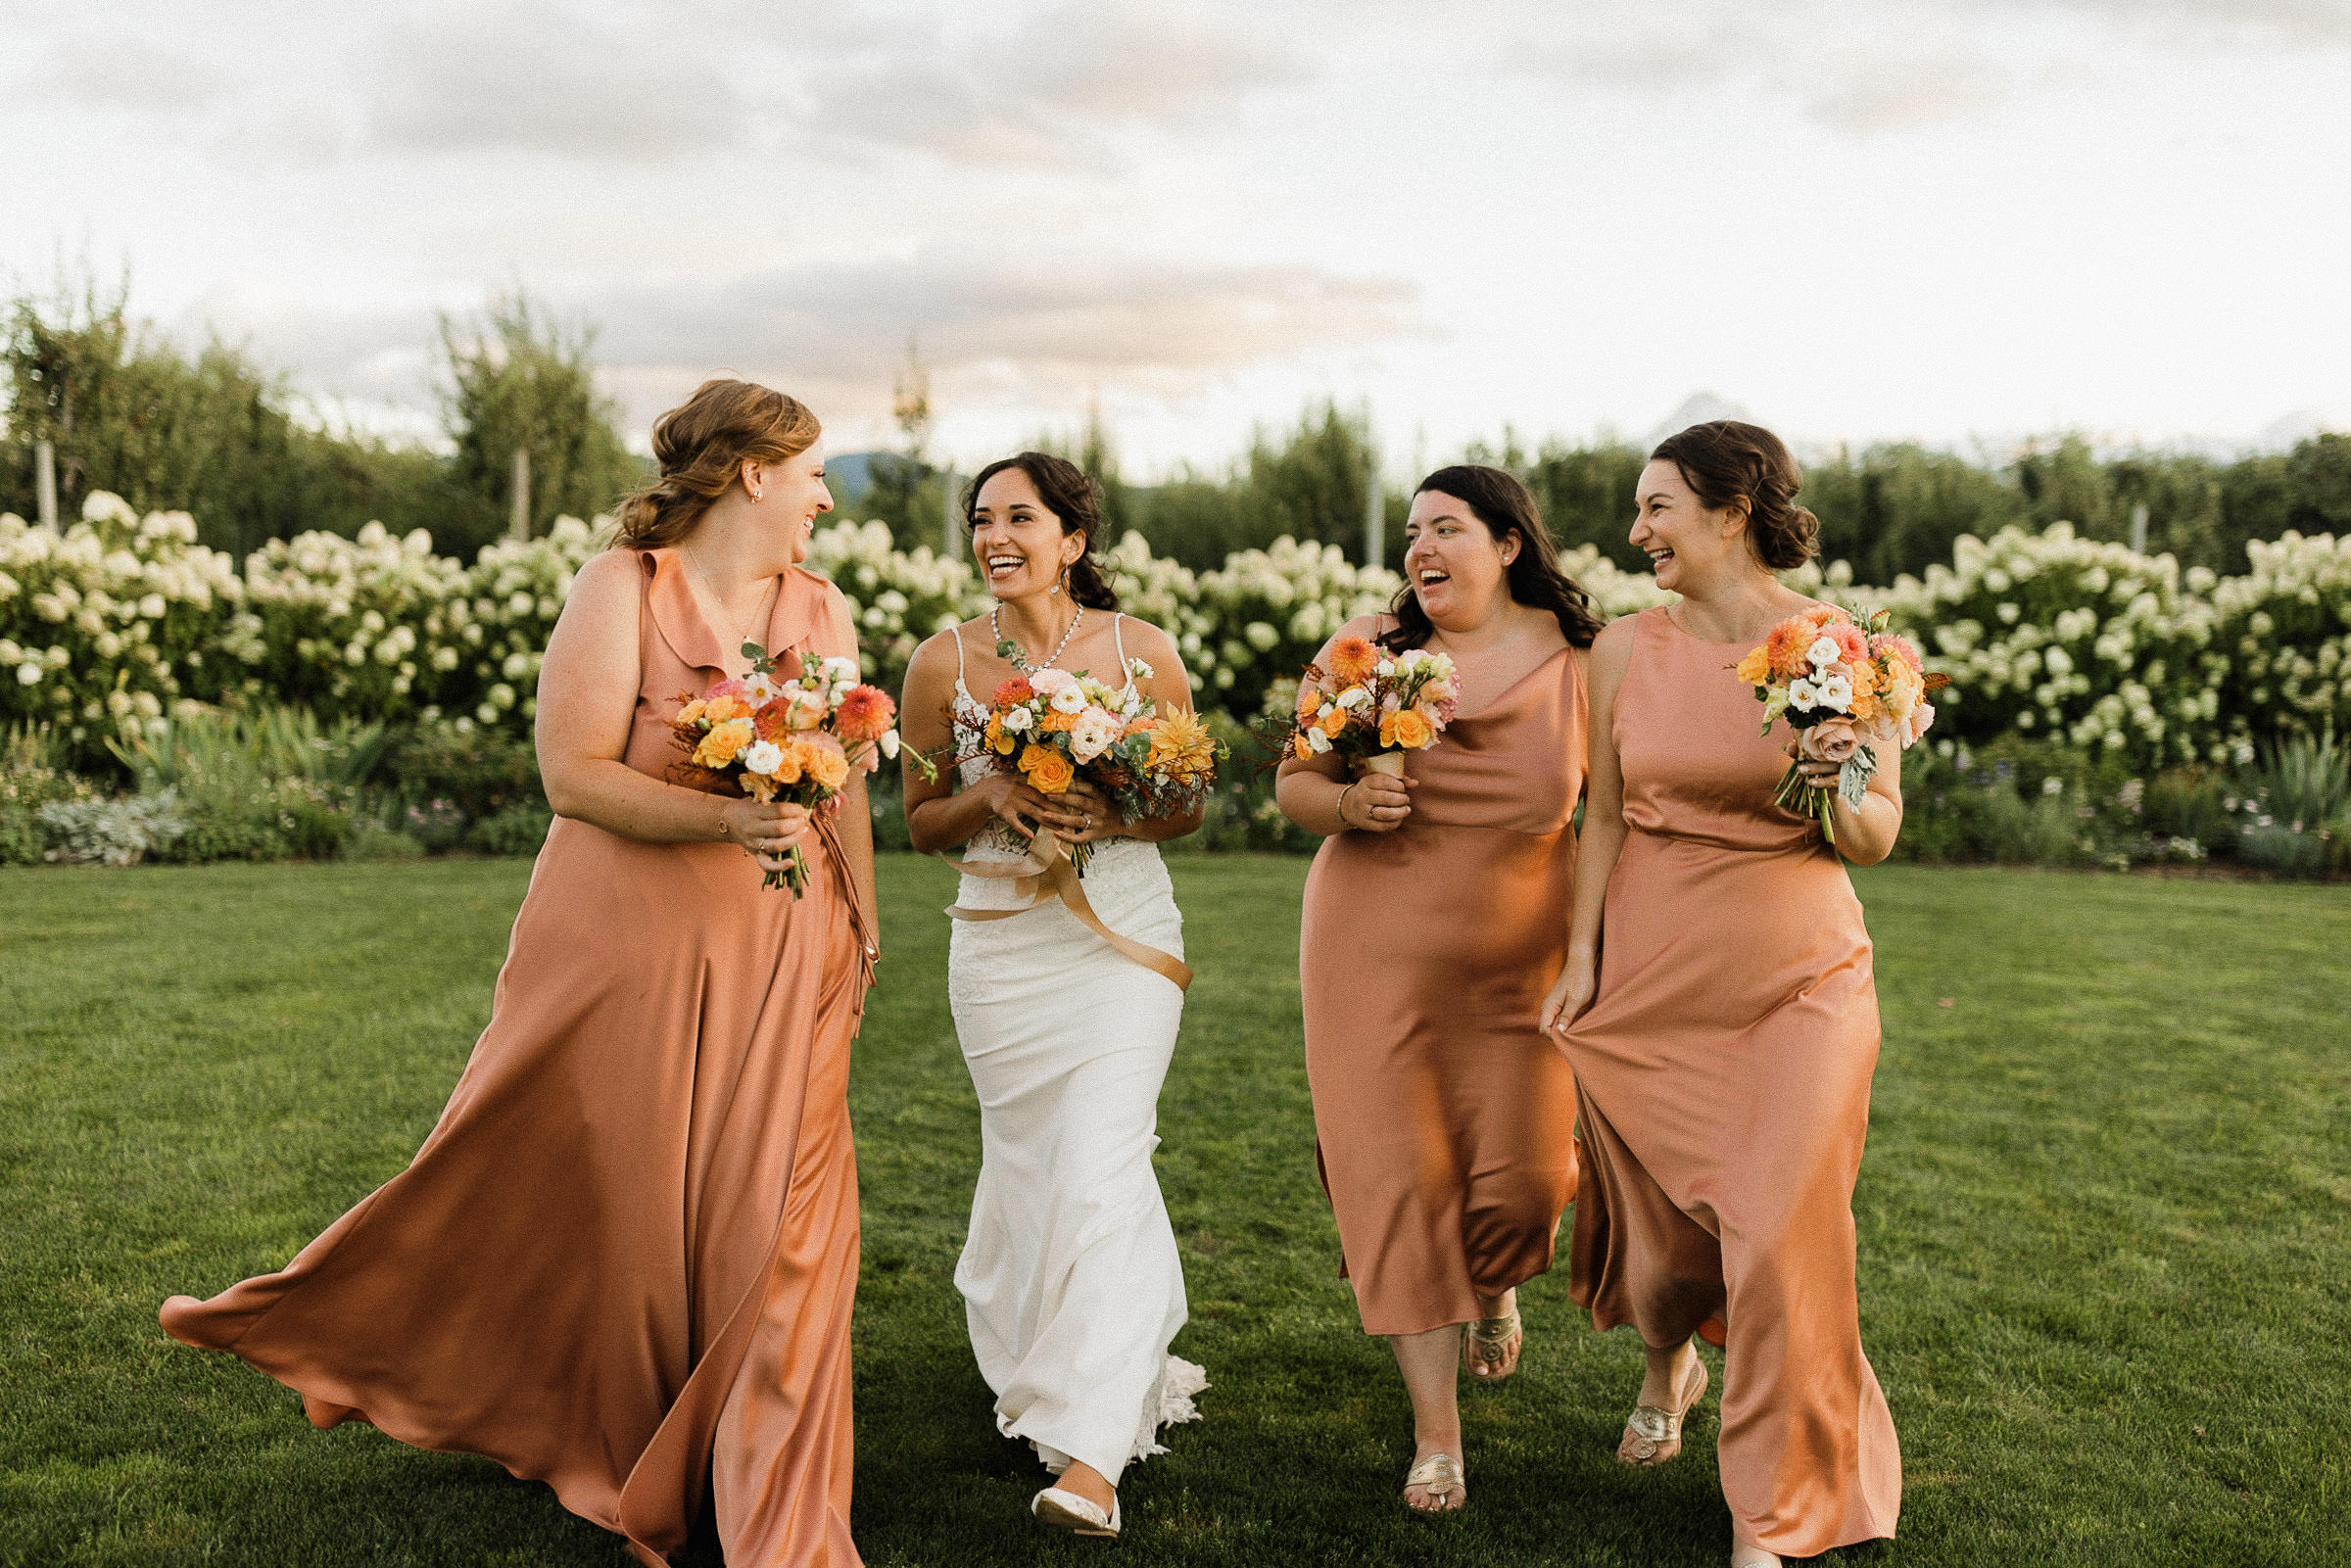 Bridal party walking and laughing